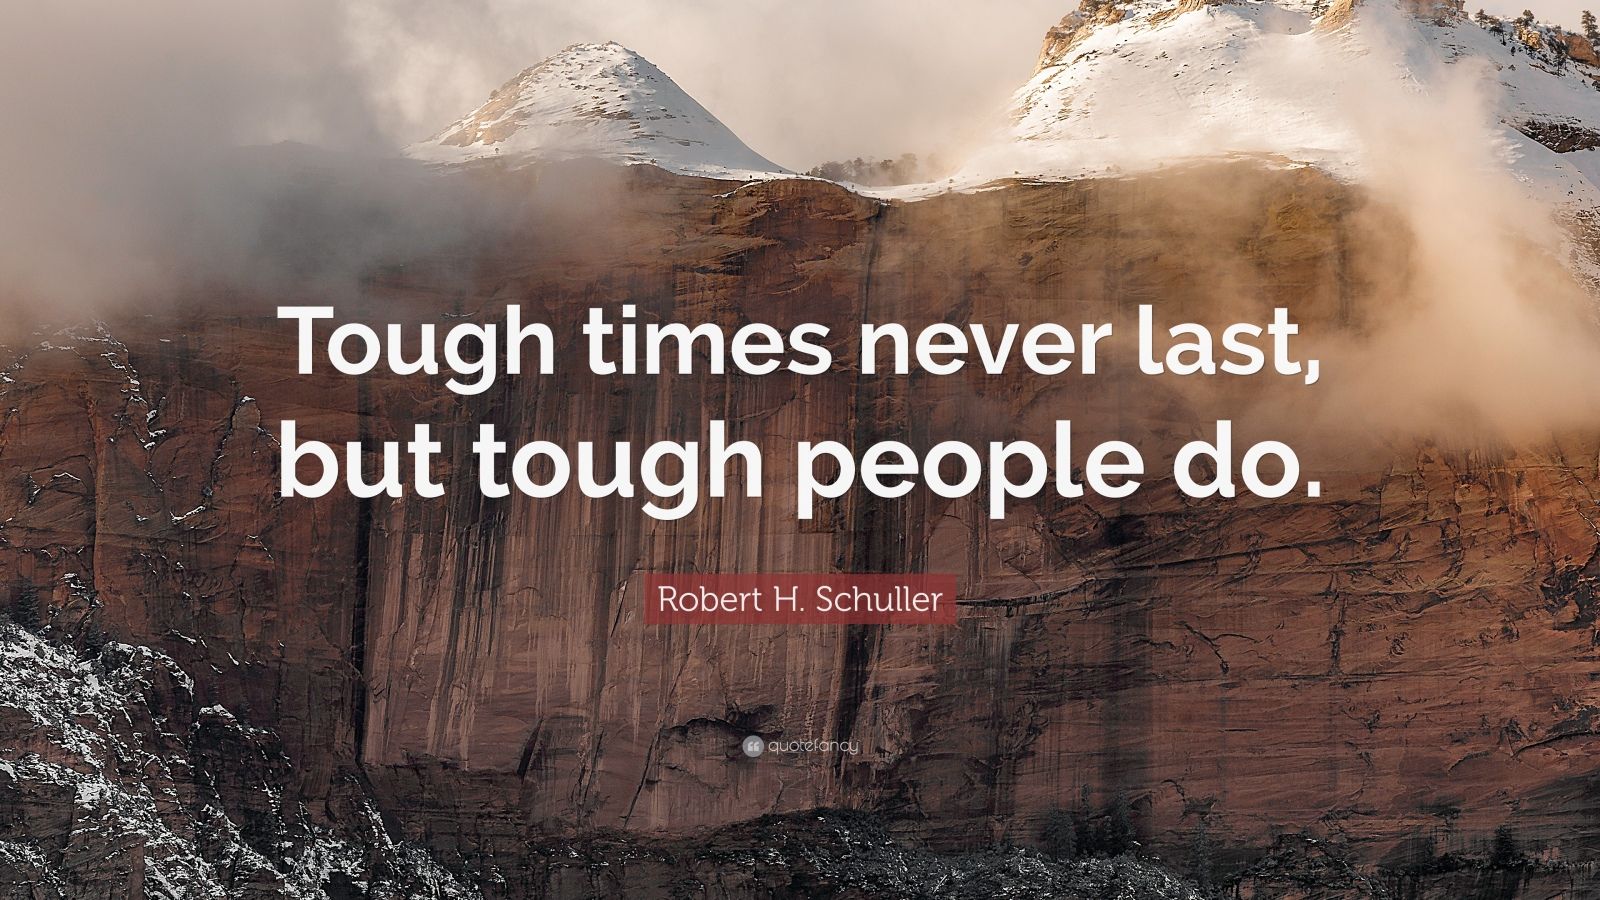 Robert H. Schuller Quote: "Tough times never last, but tough people do." (12 wallpapers ...